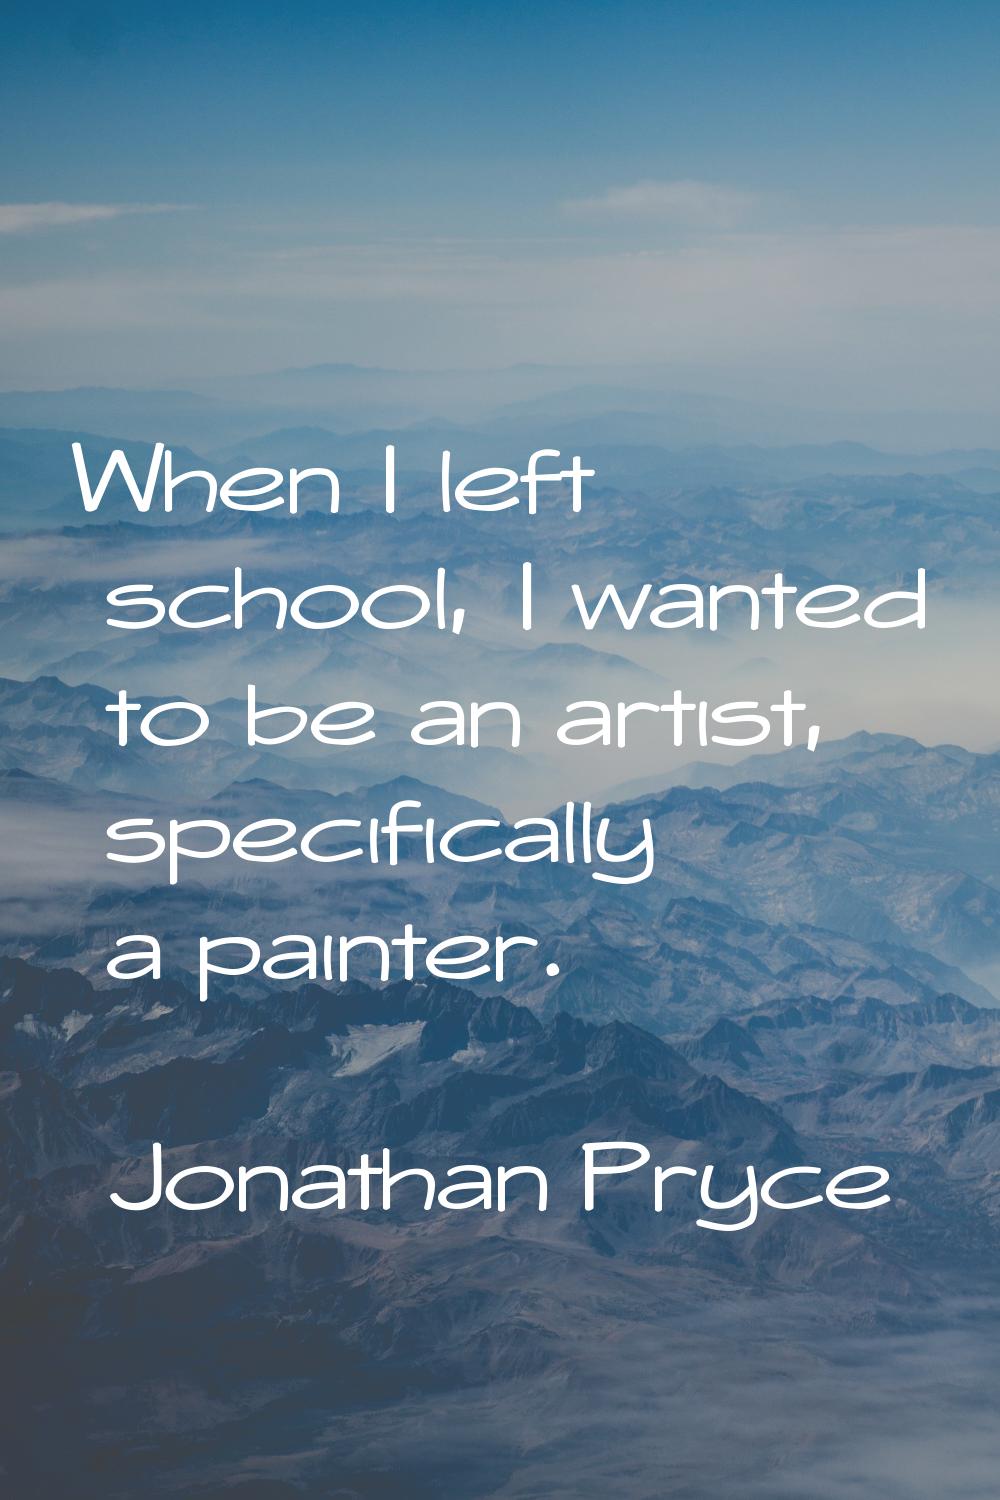 When I left school, I wanted to be an artist, specifically a painter.